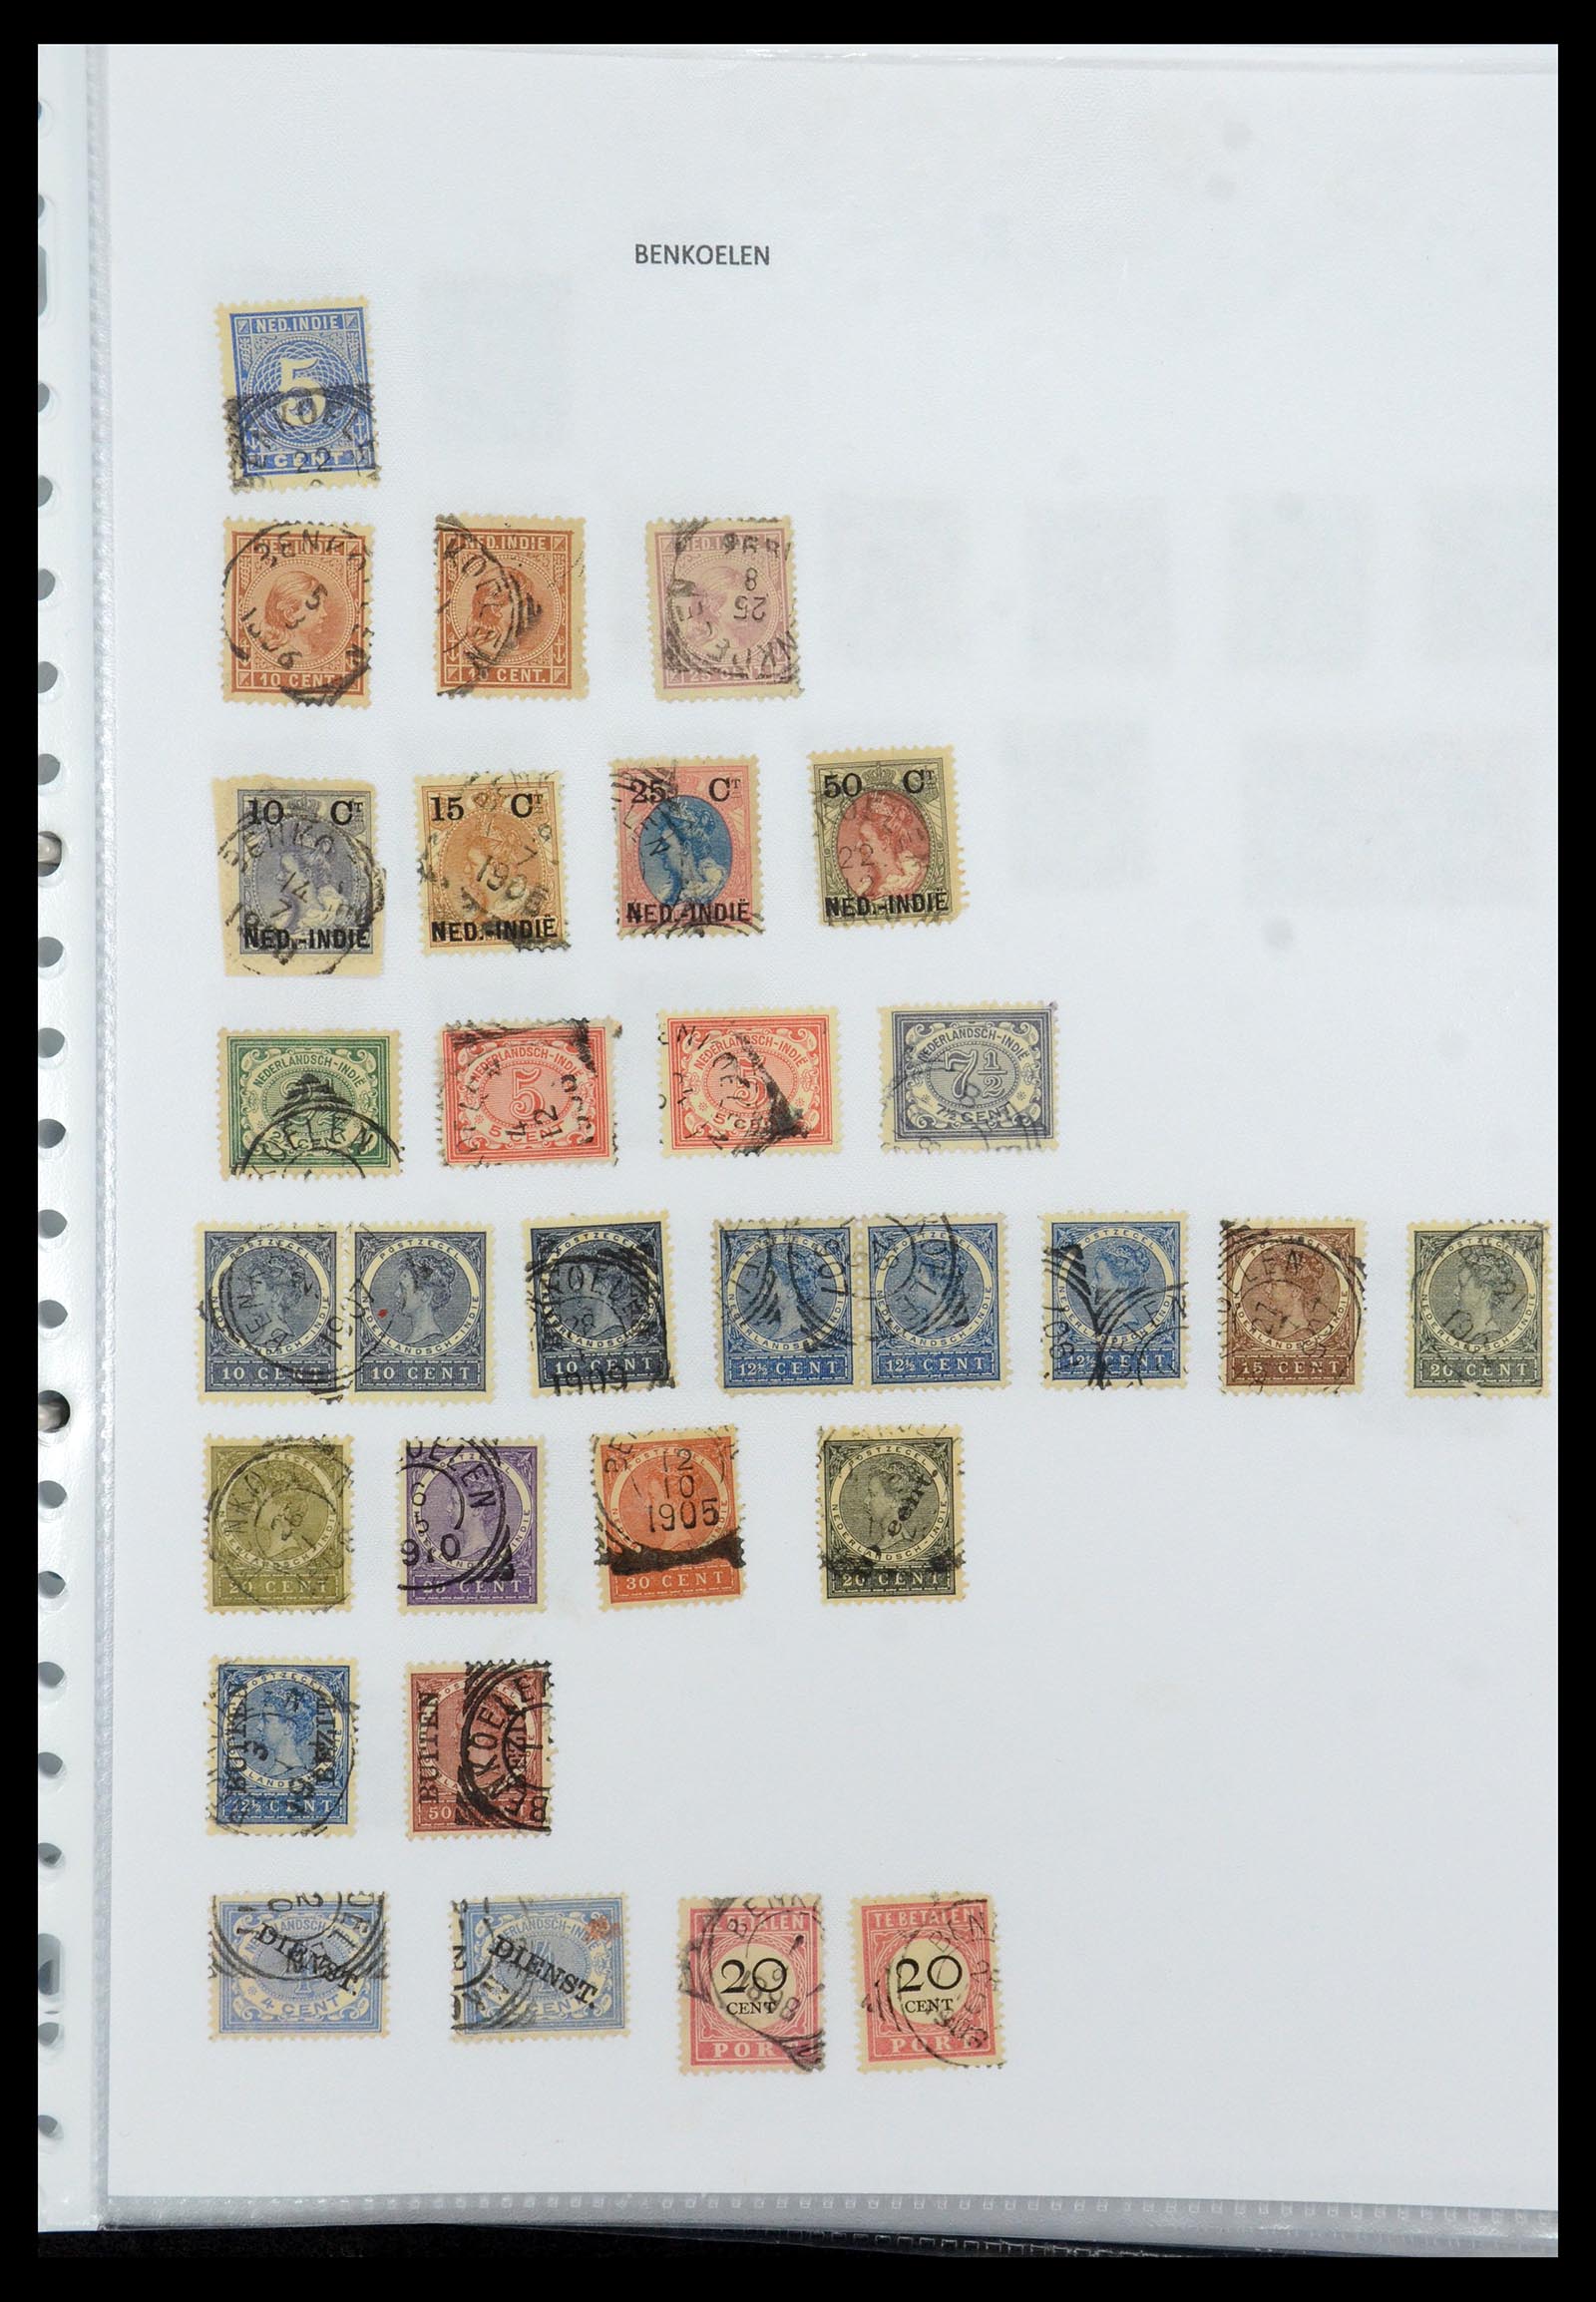 36432 027 - Stamp collection 36432 Dutch east Indies square cancels.